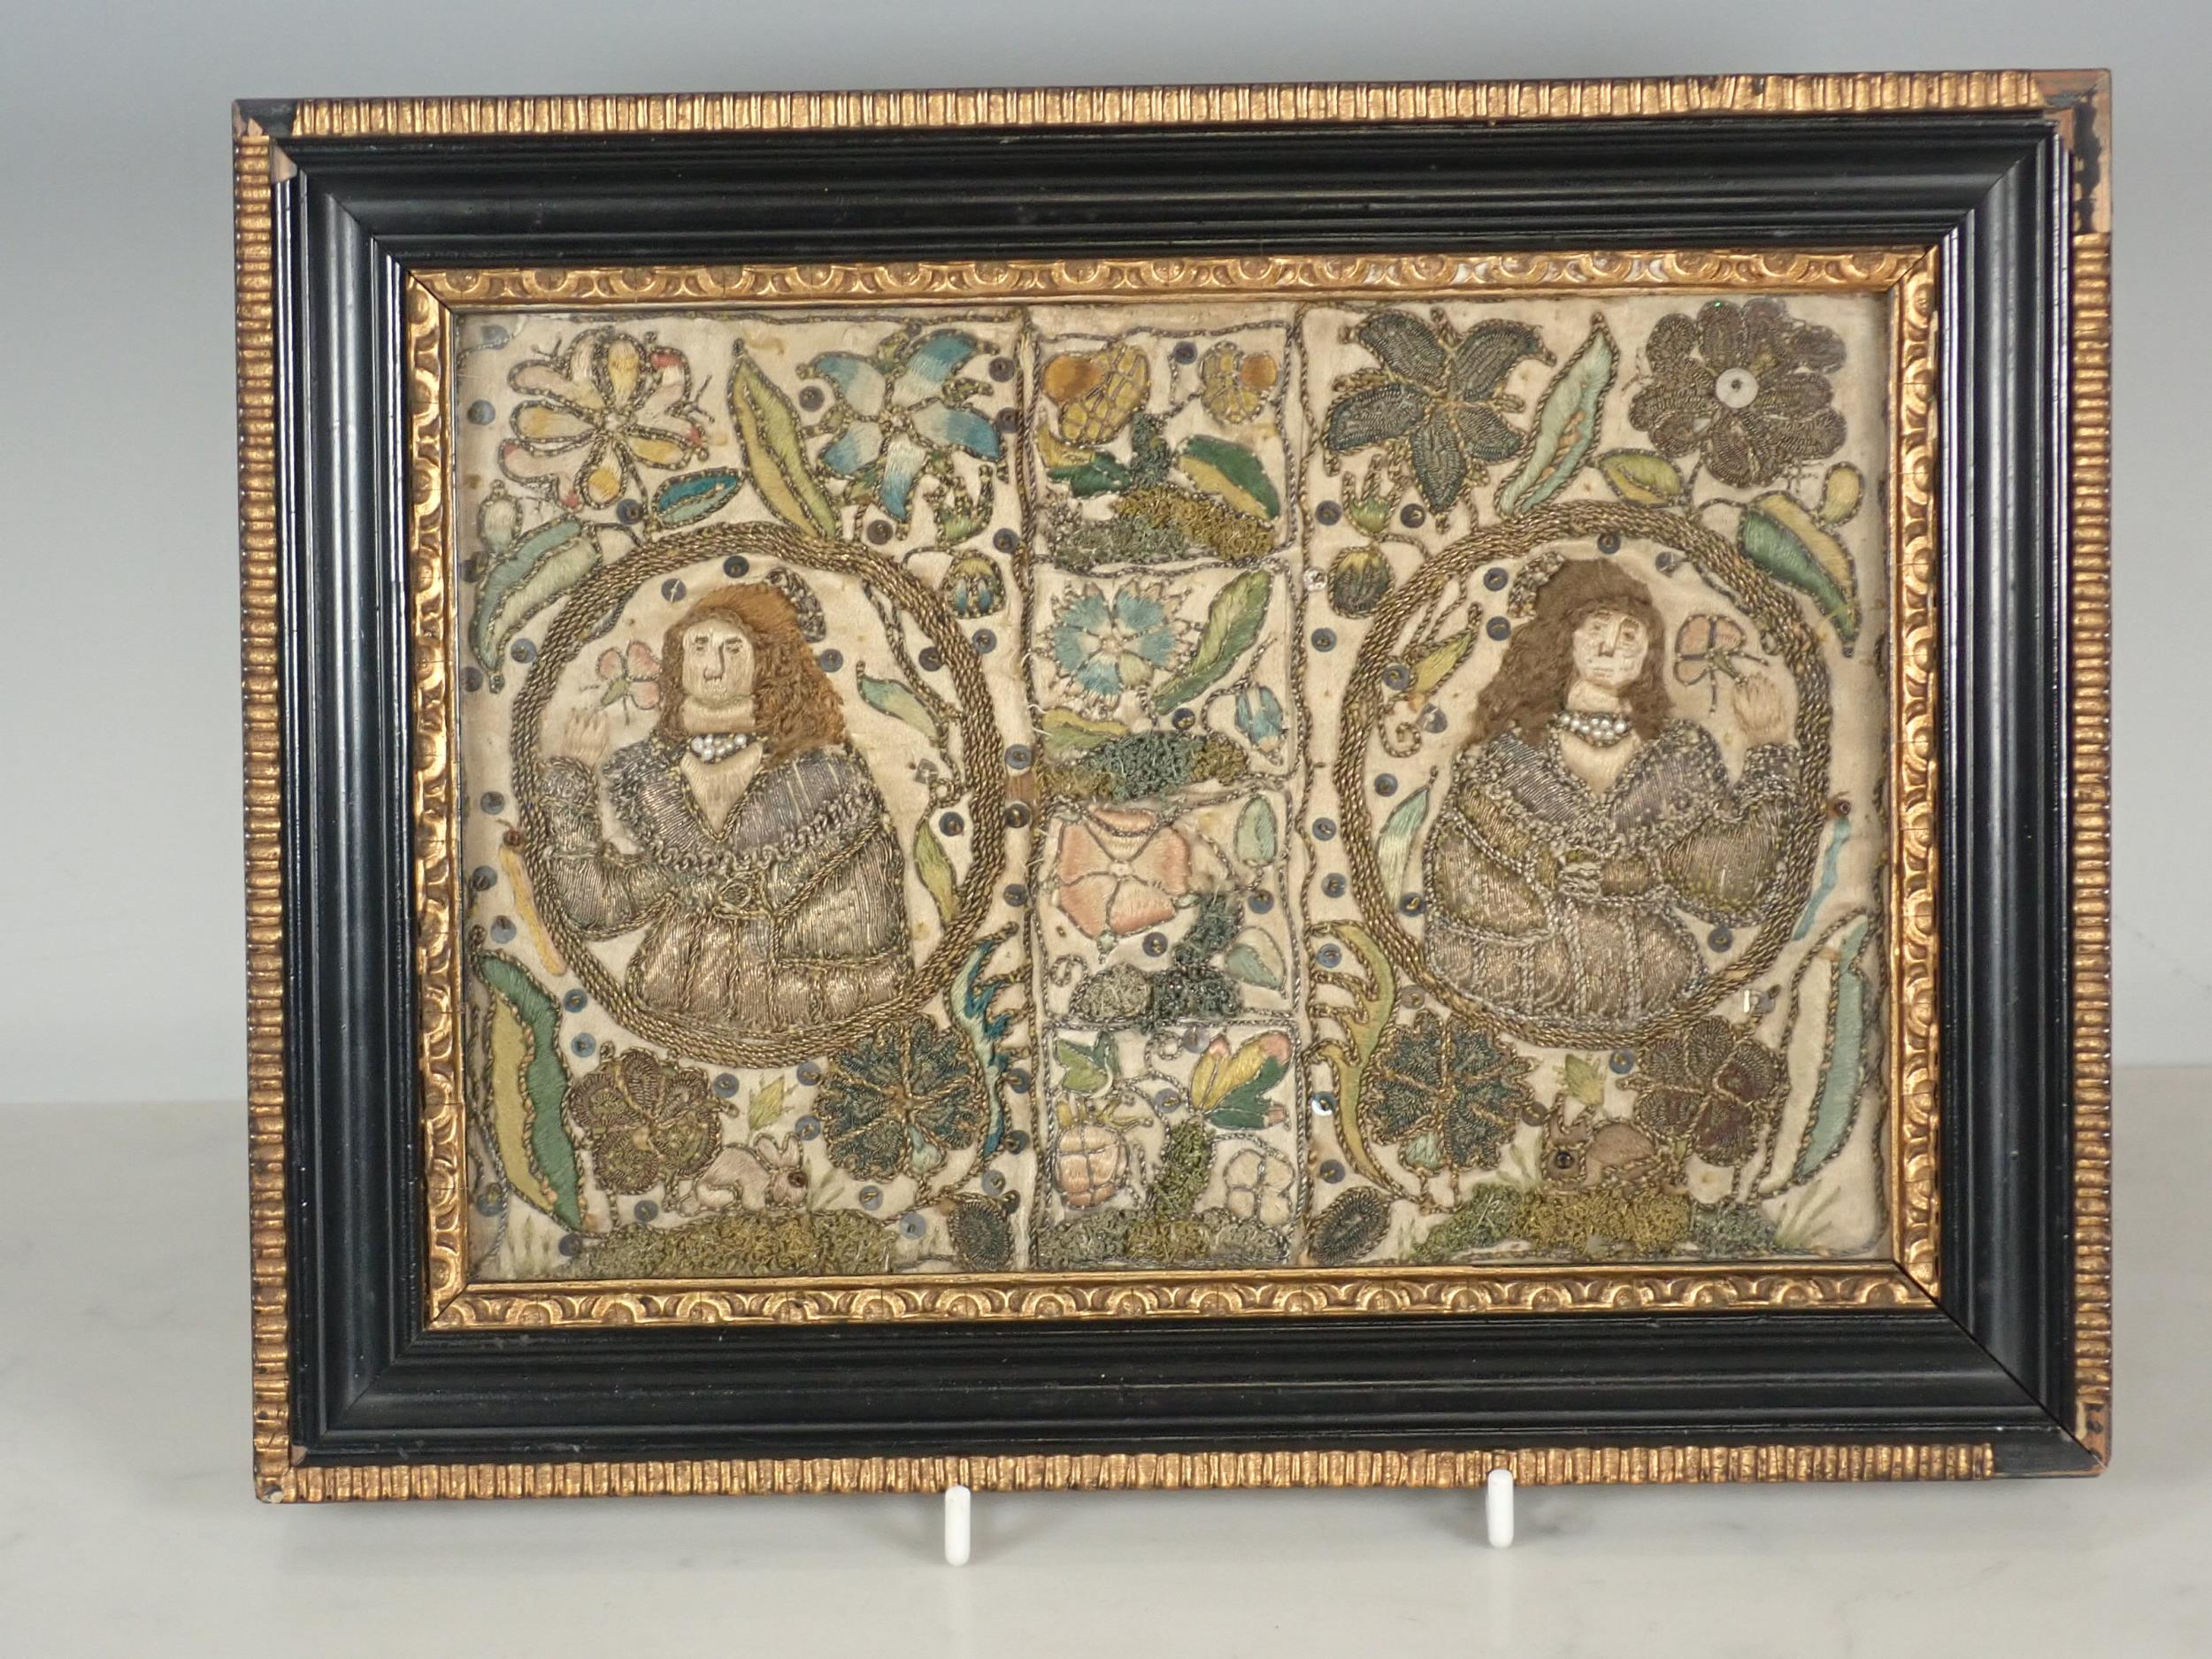 A 17th Century Stumpwork Panel depicting two portraits of figures with floral motifs in gold and